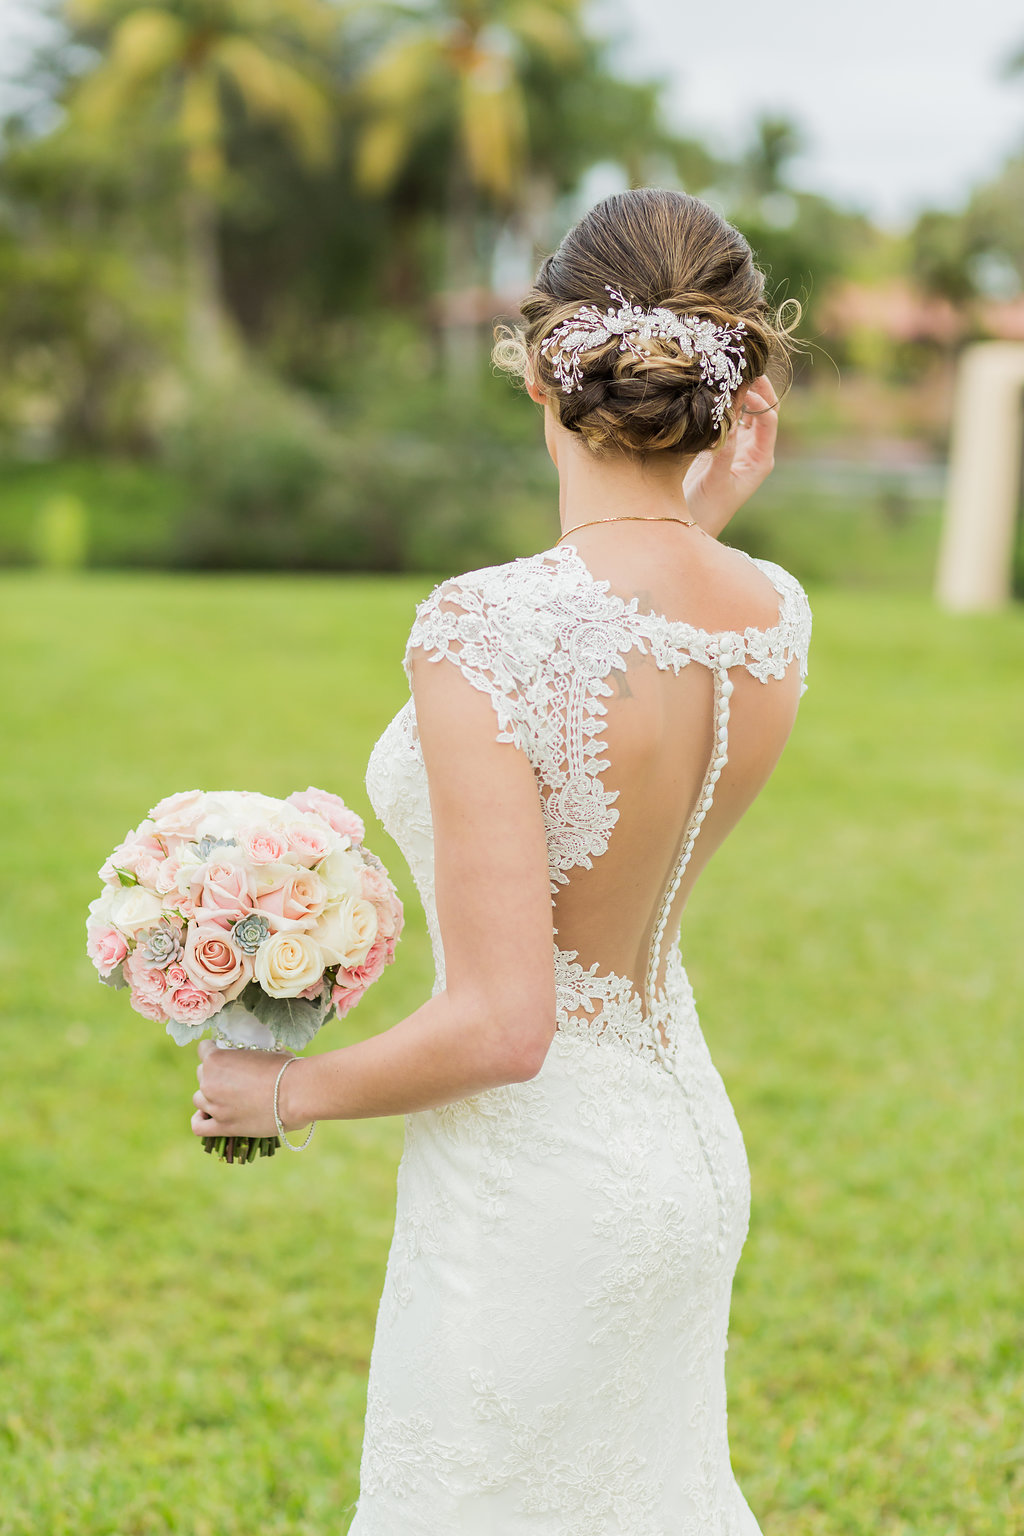 The bride's wedding dress is lace, open back, with beaded spine, lace detailing, lace cap sleeves and a low cut front with rose bouquet and dusty miller